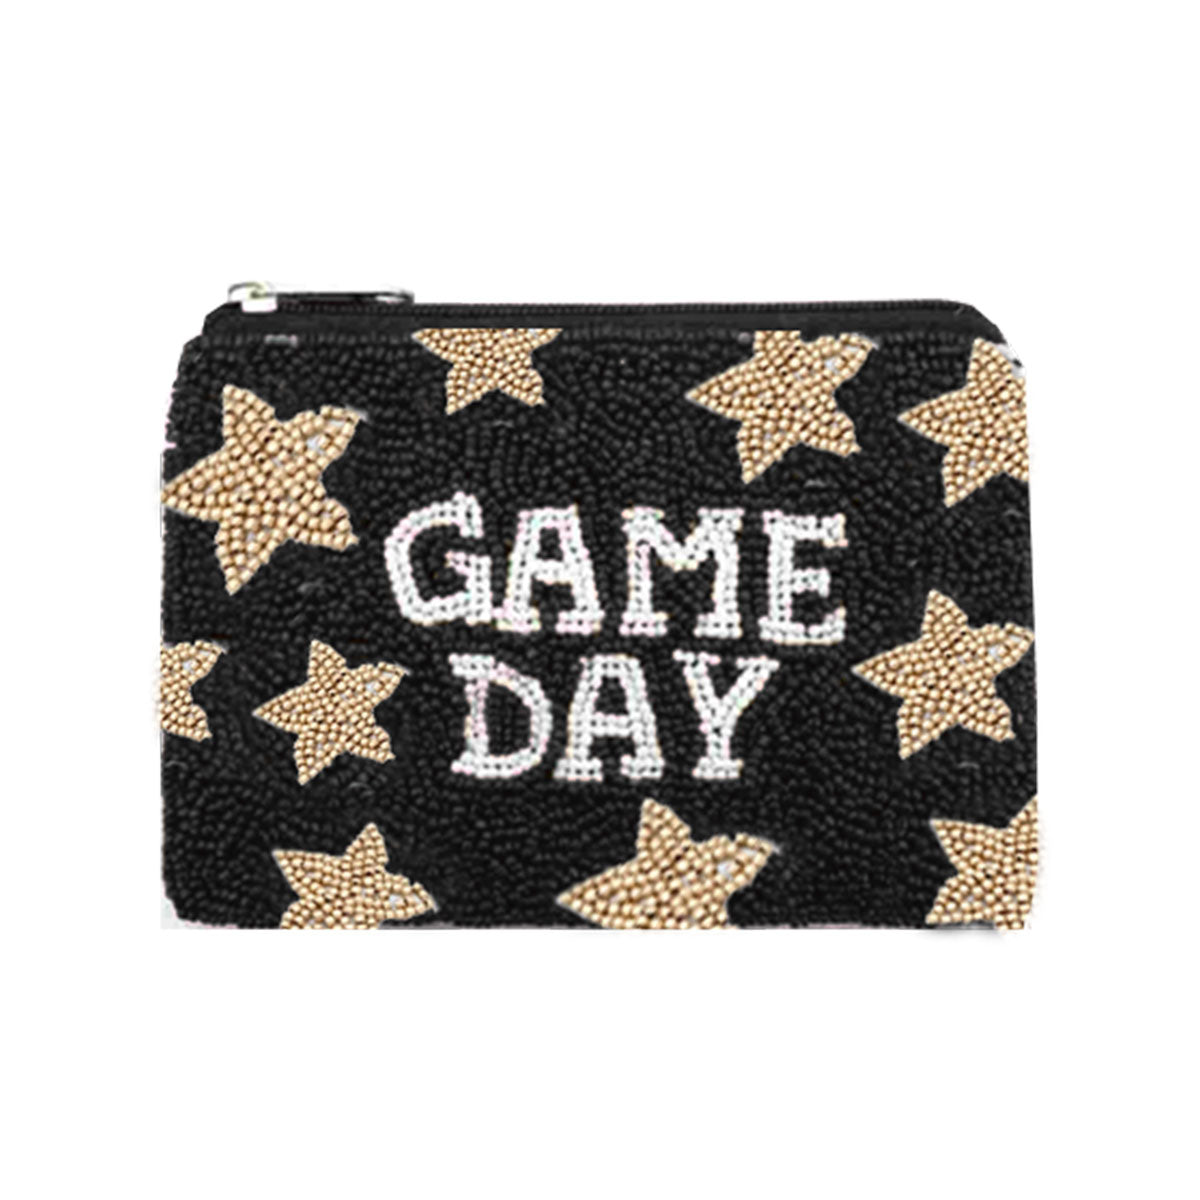 Black and Gold Star Beaded Coin Purse